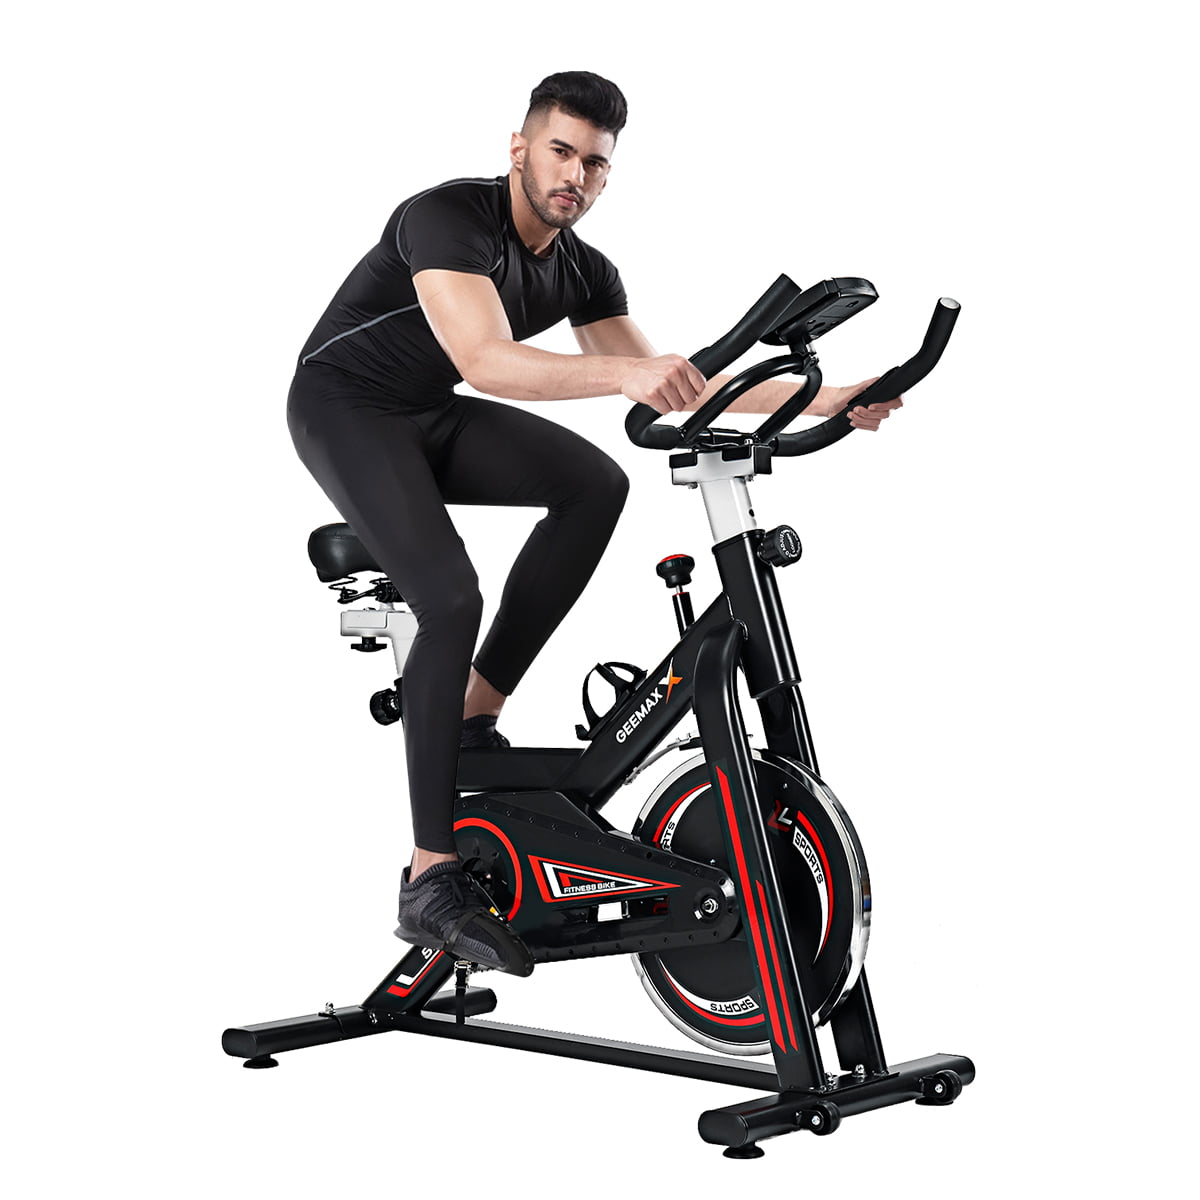 Stationary Exercise Gymnastic Bike Bicycle Cardio Workout Fitness Indoor Trainer 